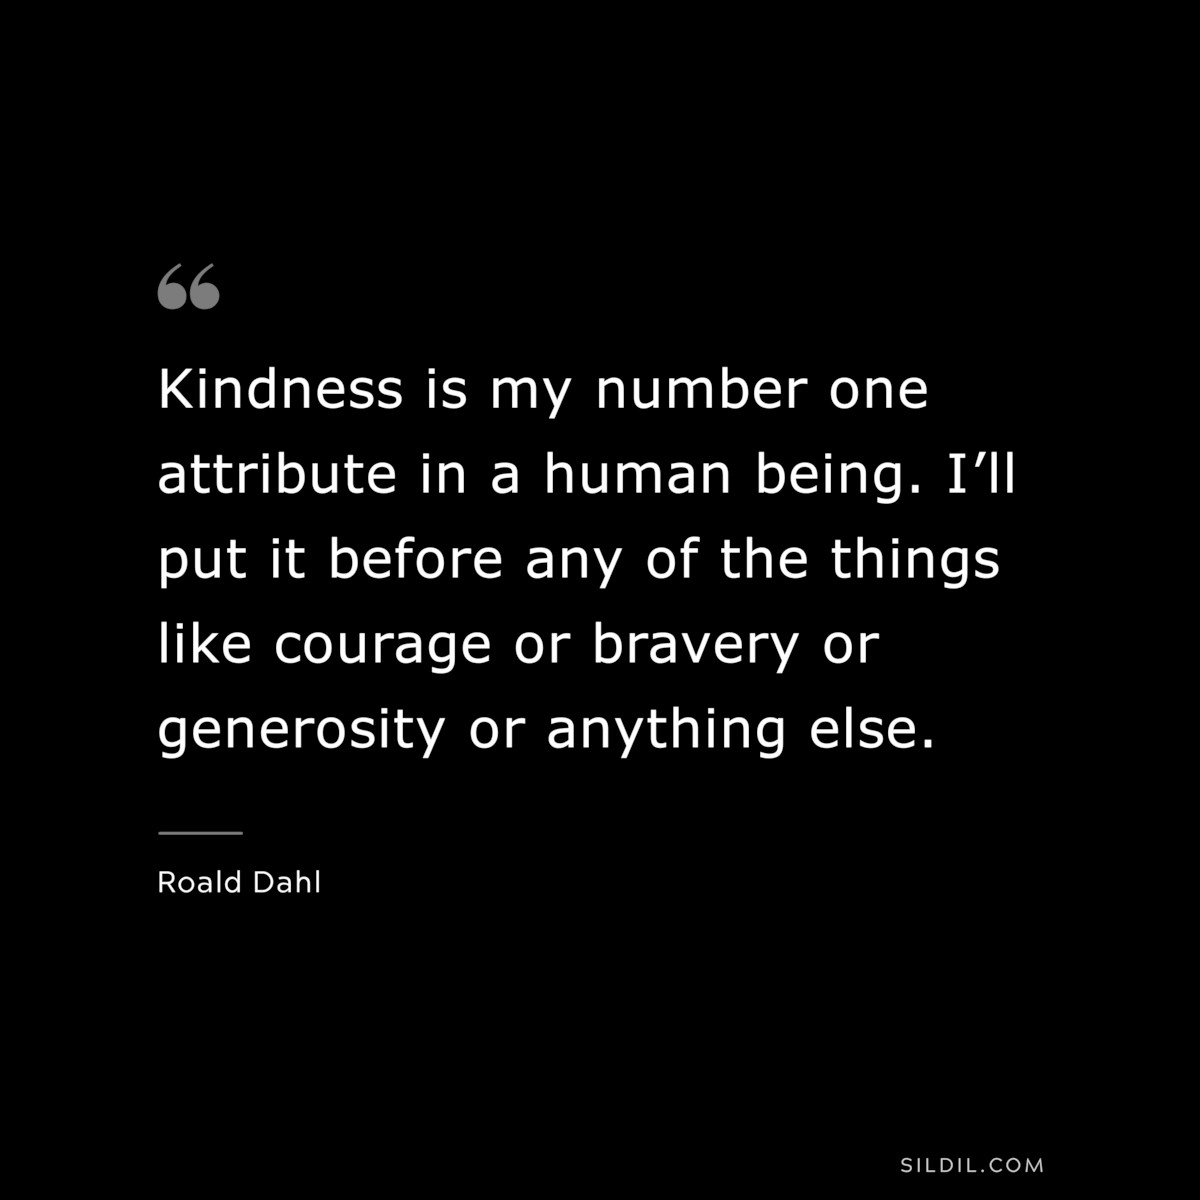 Kindness is my number one attribute in a human being. I’ll put it before any of the things like courage or bravery or generosity or anything else. ― Roald Dahl